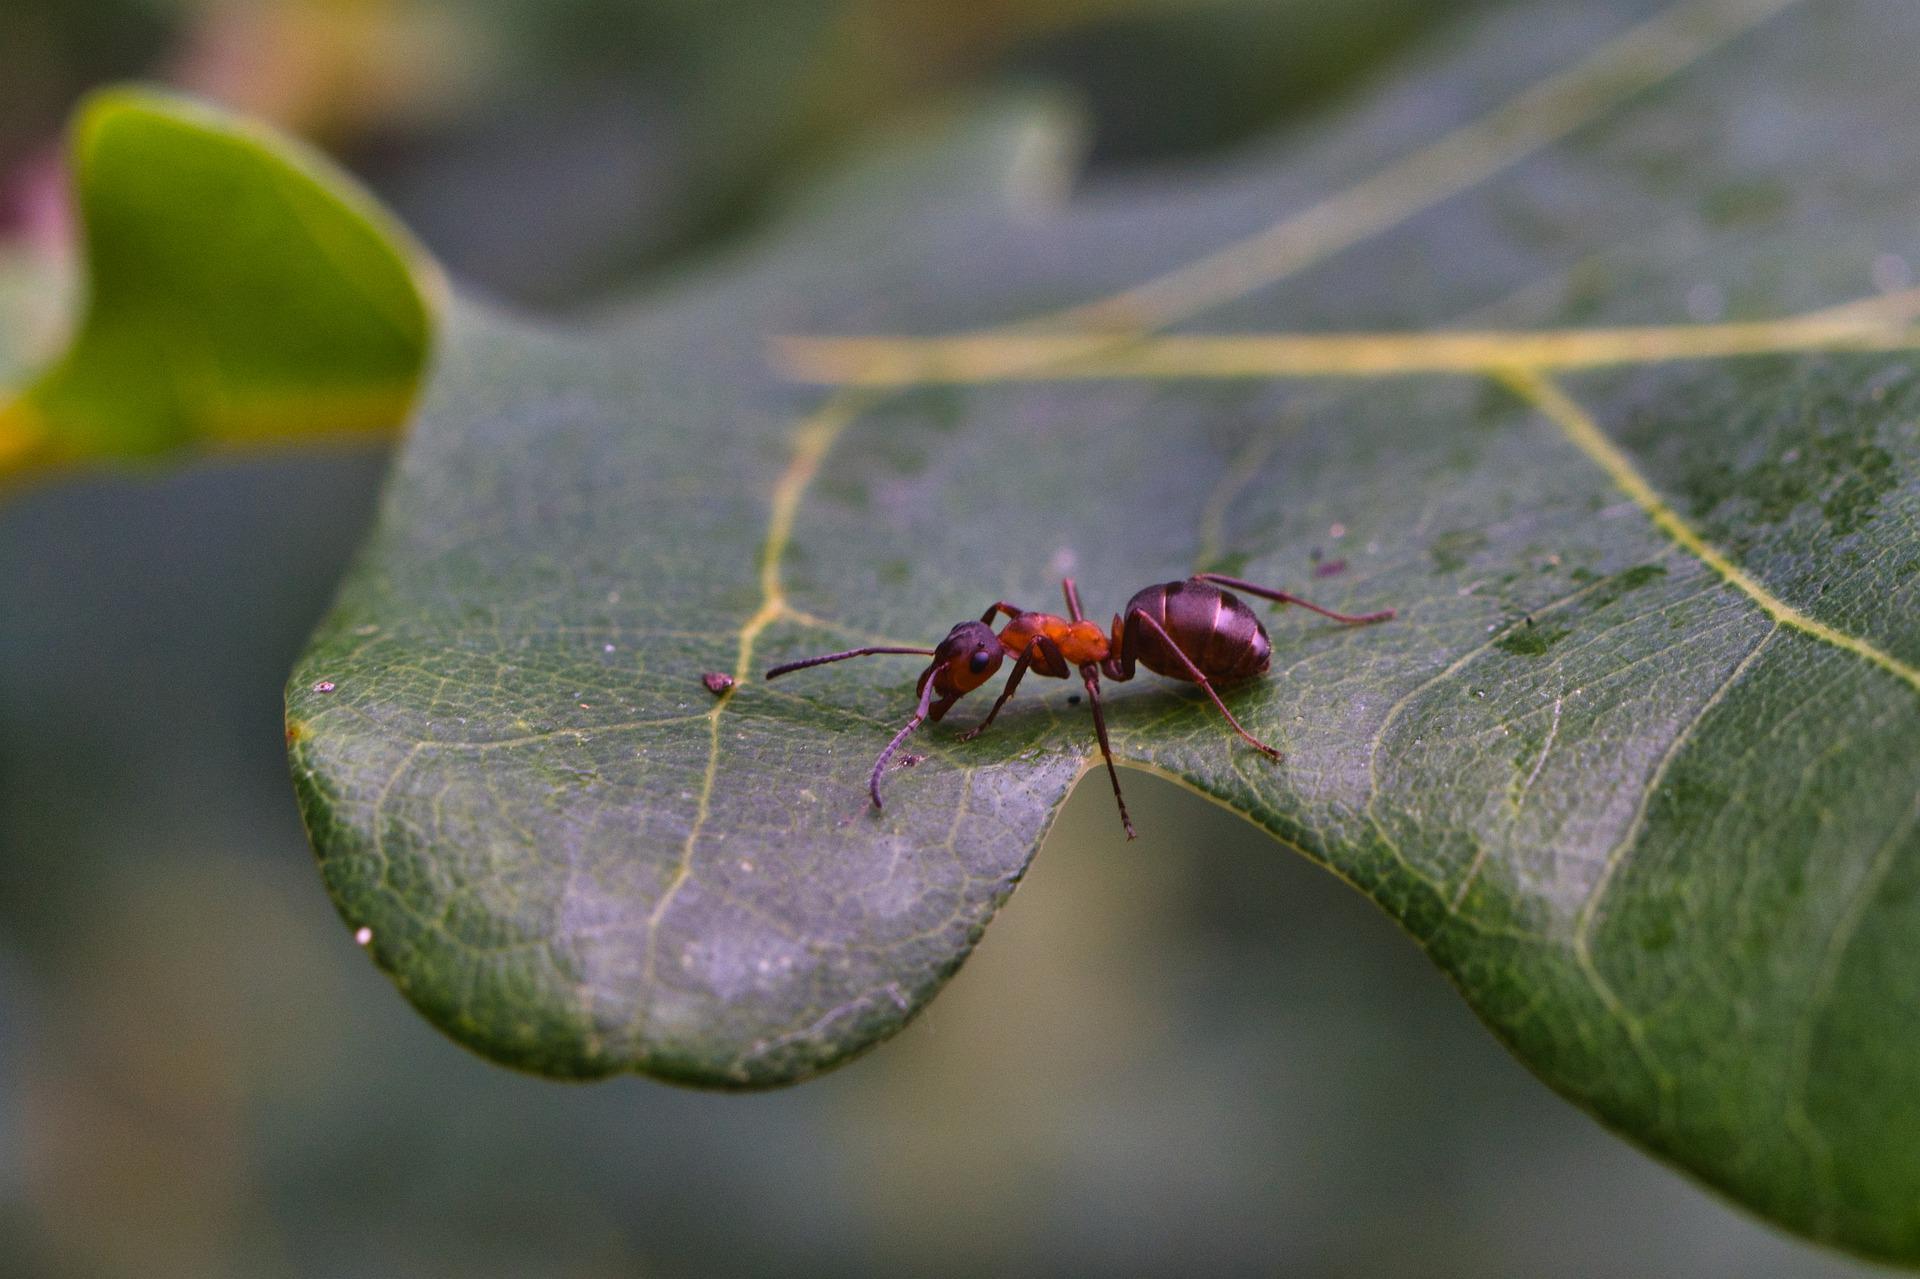 How To Get Rid Of Ants In House Plants Naturally